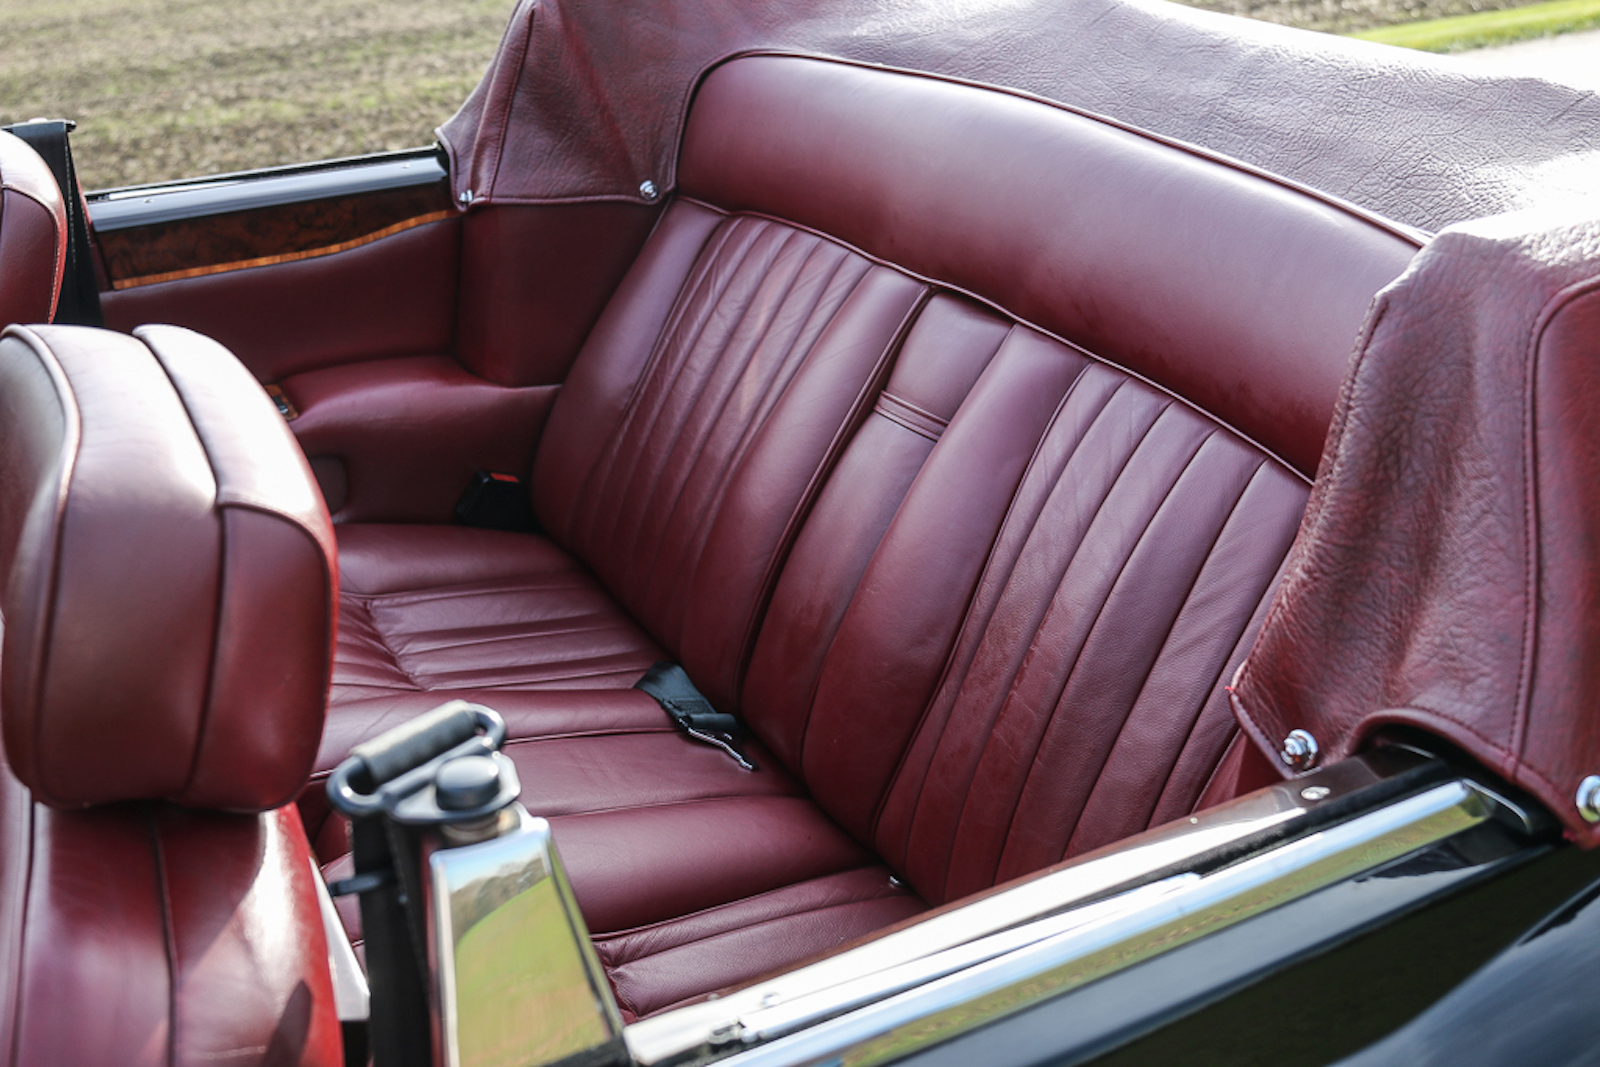 Come drive with me: Frank Sinatra’s Rolls-Royce Corniche up for sale